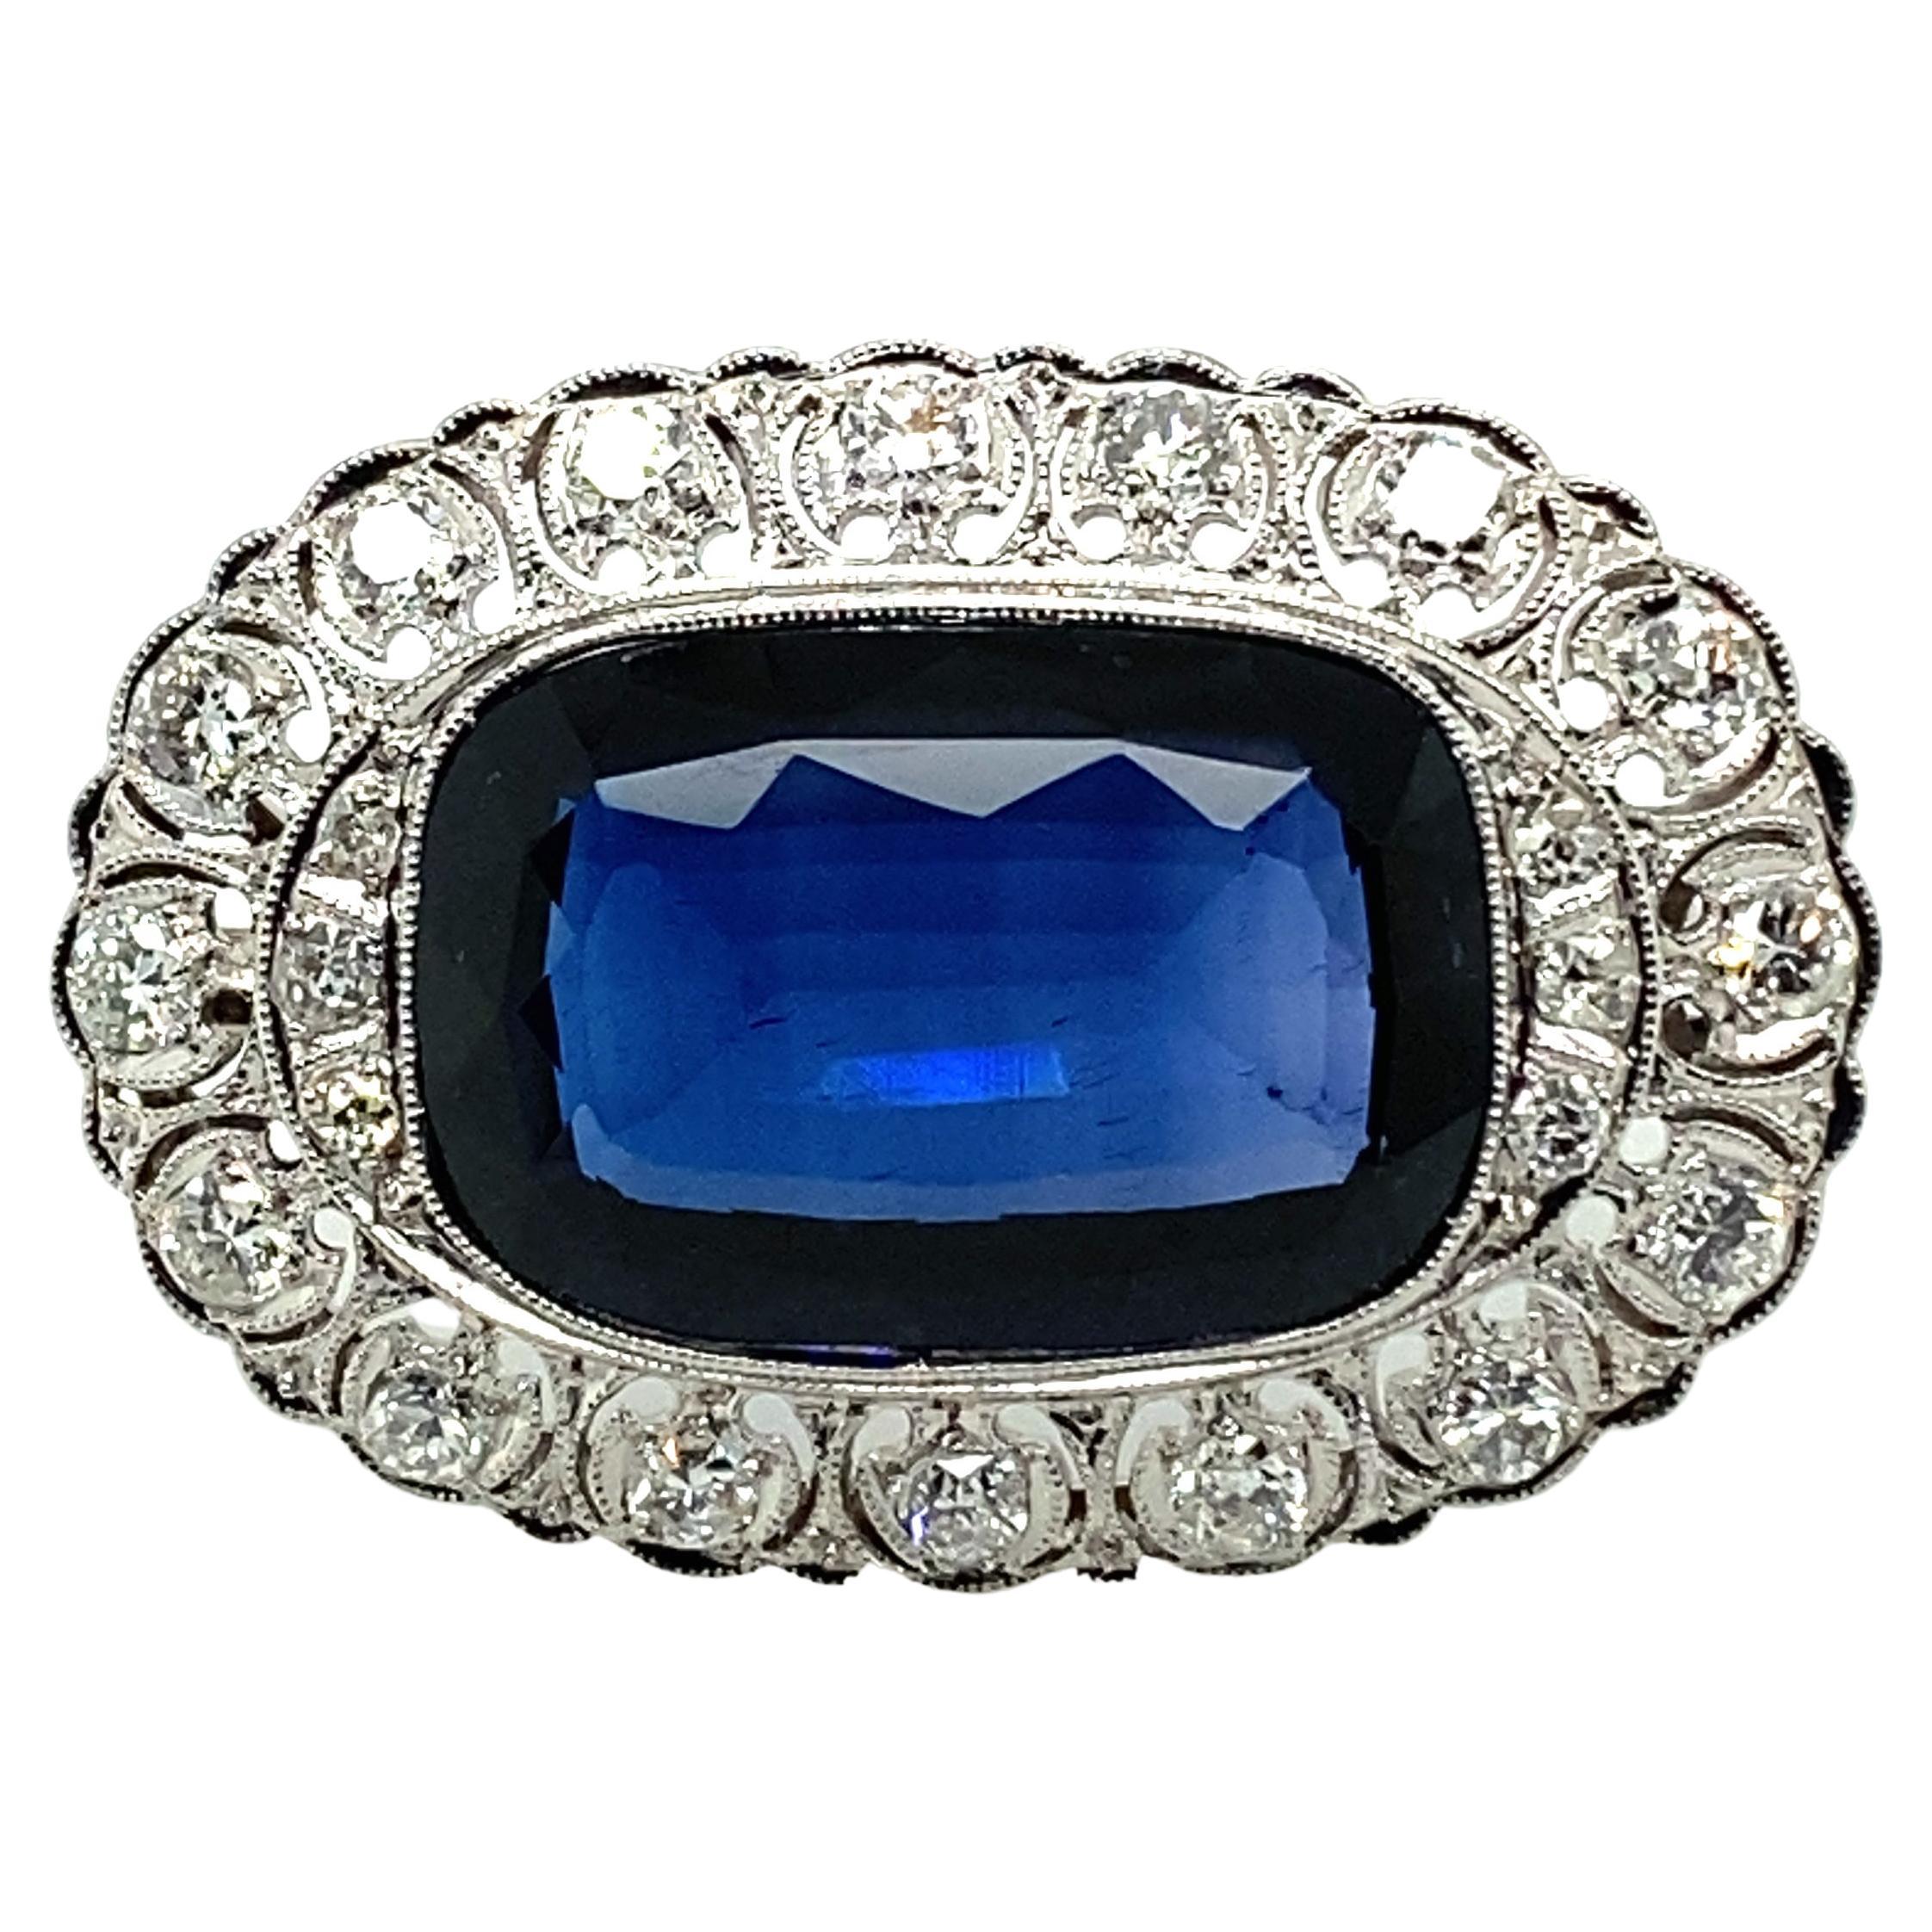 Diamond and Synthetic Sapphire Brooch in 14 Karat White Gold